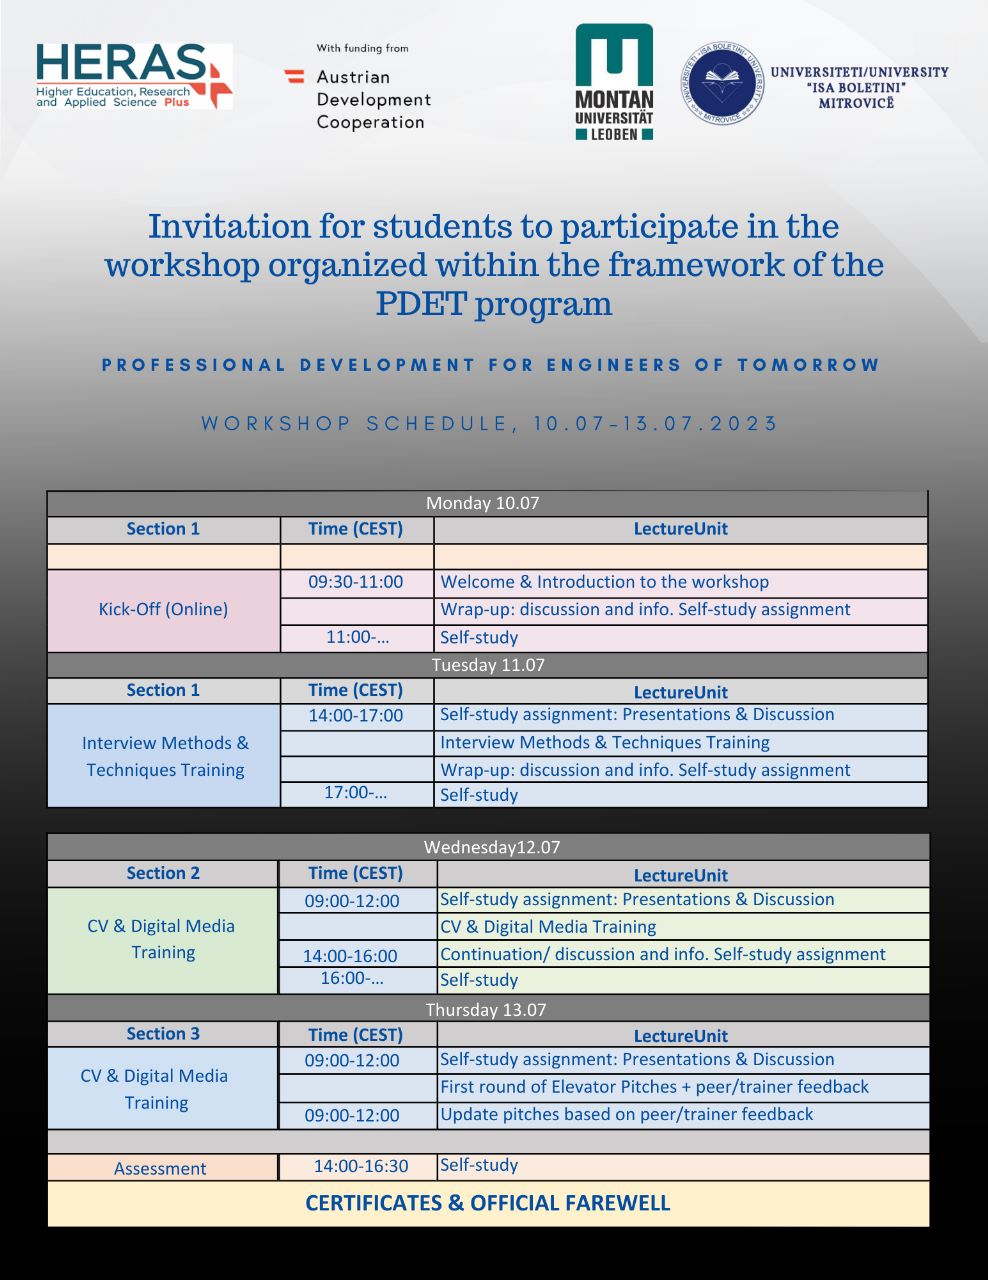 Invitation To Participate In The Professional Development Training For Tomorrow’s Engineers